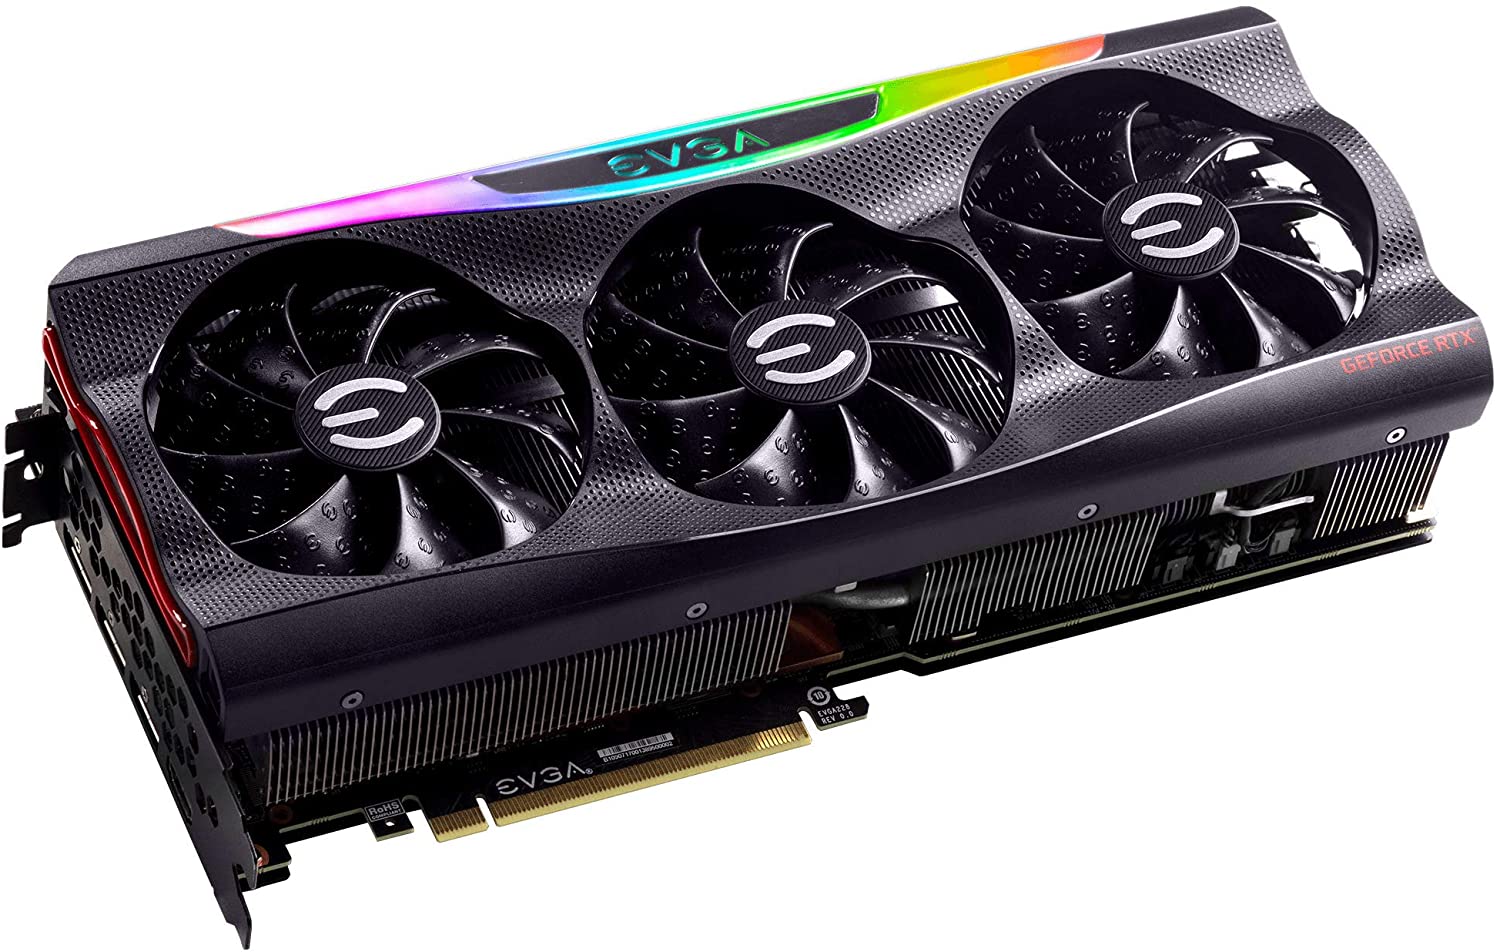 A shipment of EVGA RTX cards with thousands of dollars worth of GPUs stolen